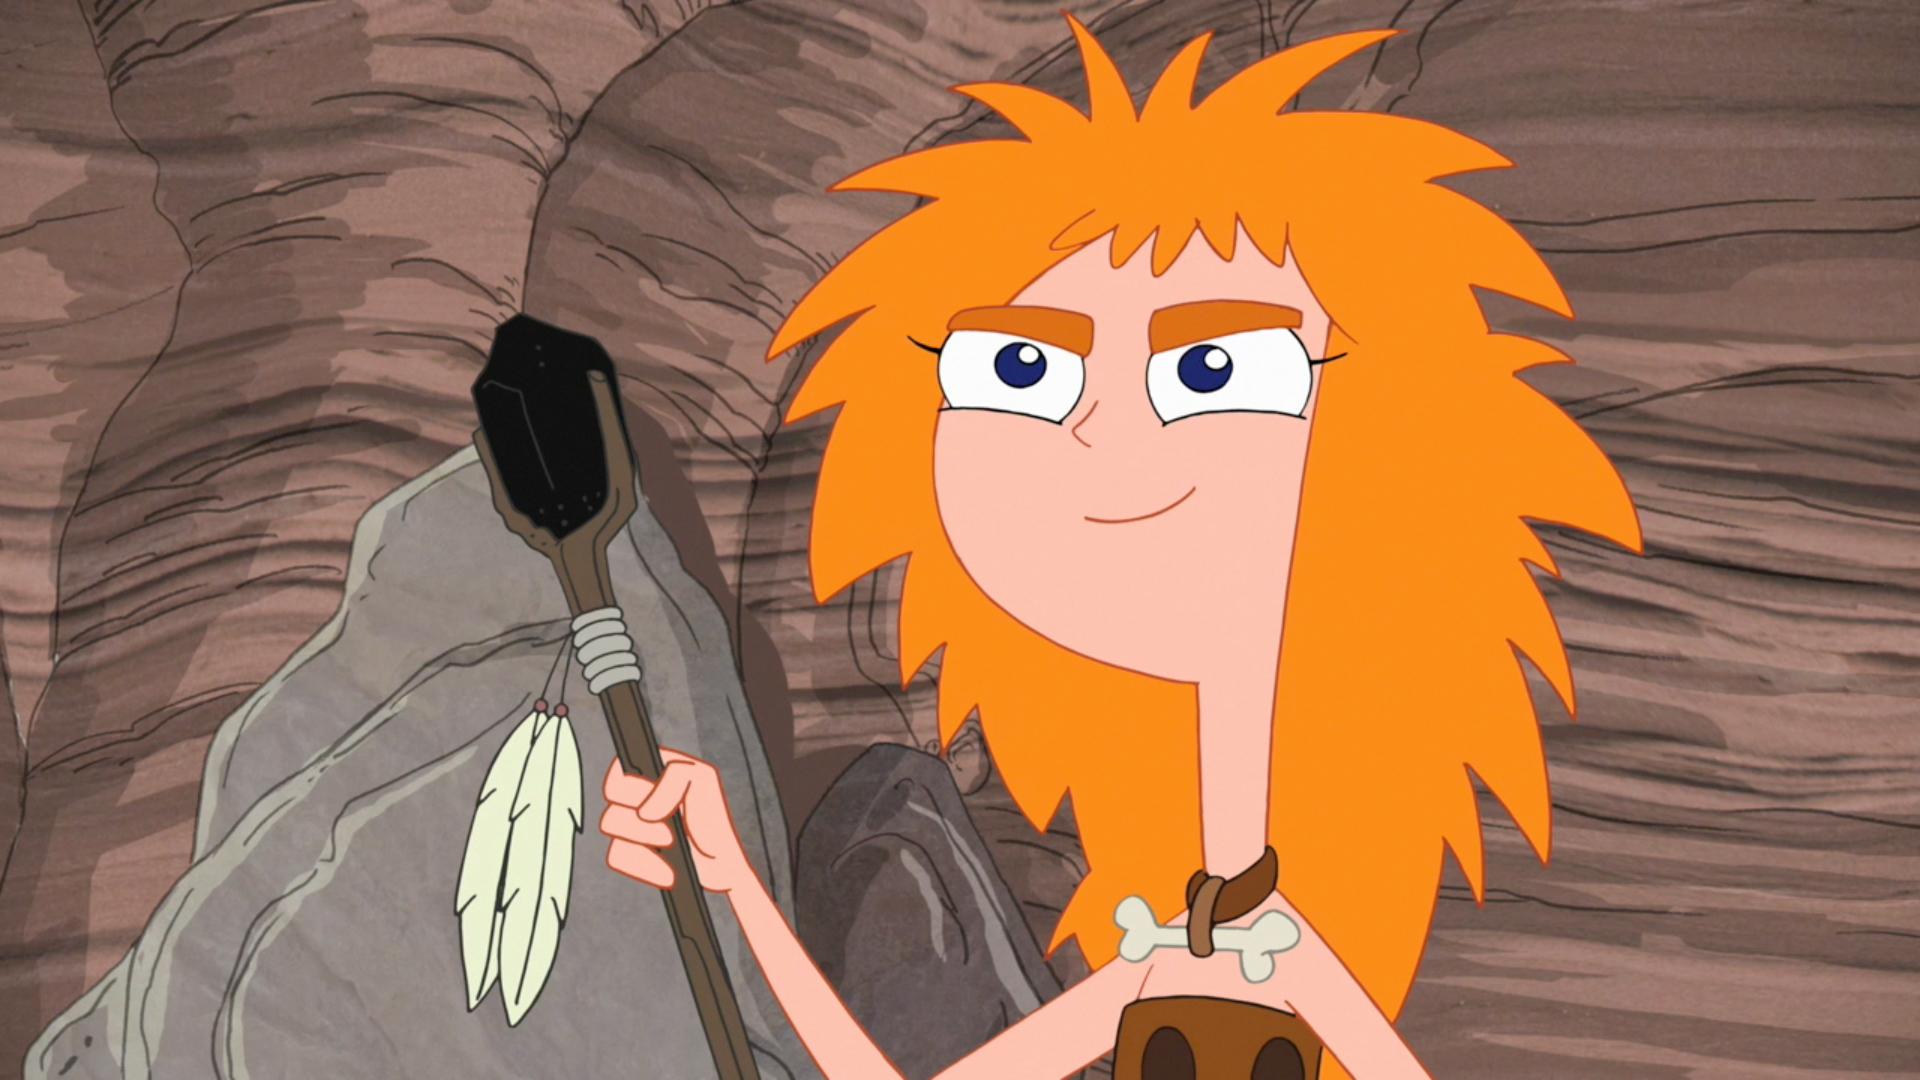 Can-tok | Phineas and Ferb Wiki | FANDOM powered by Wikia